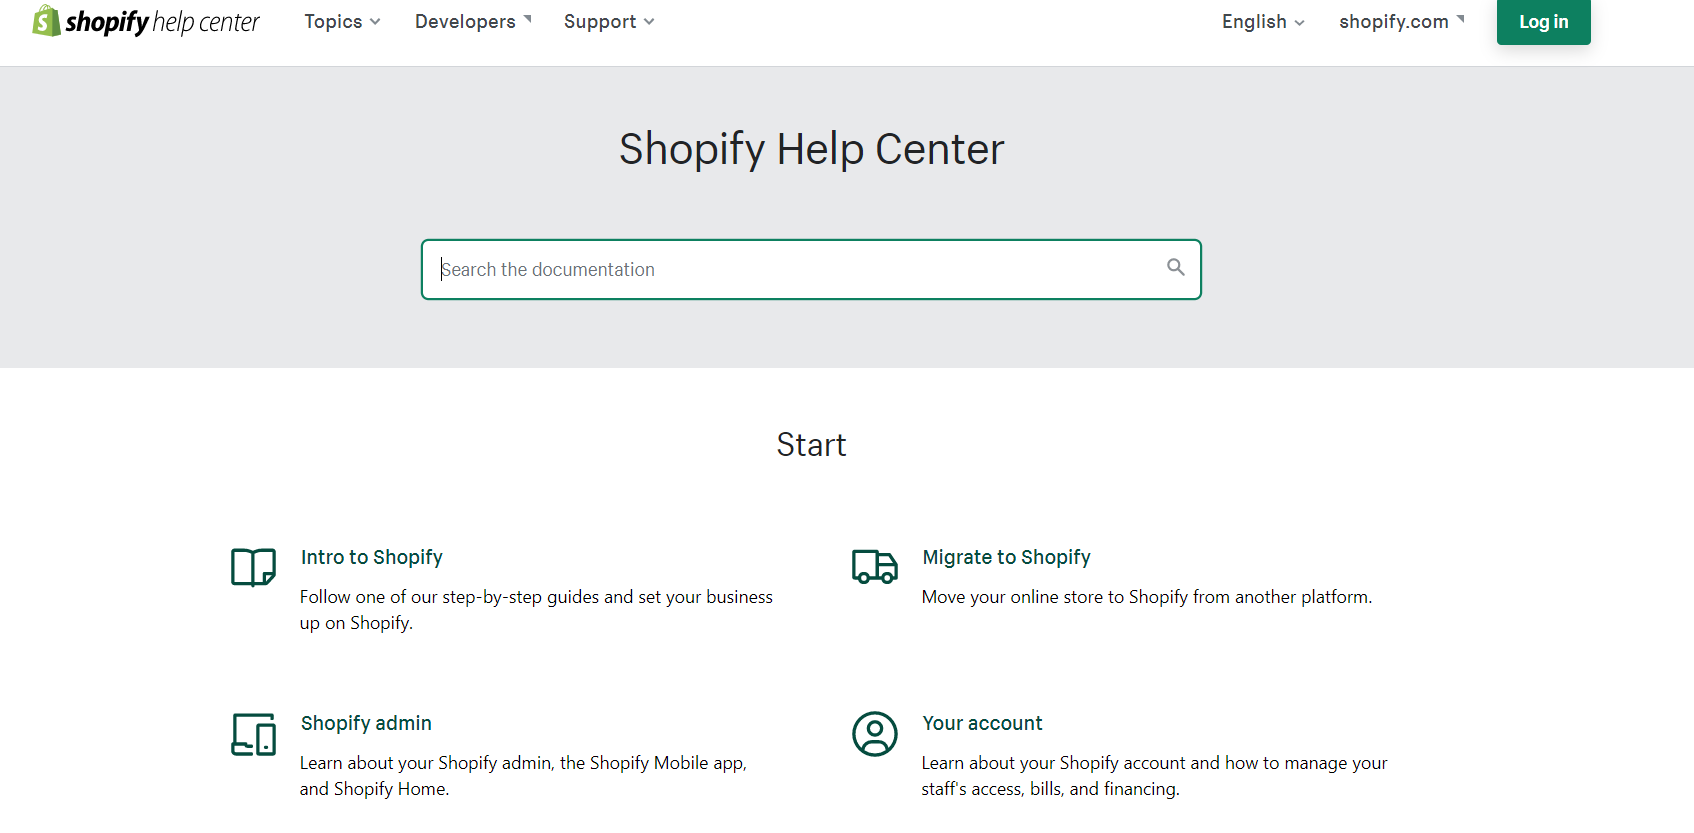 Shopify: Customer Support